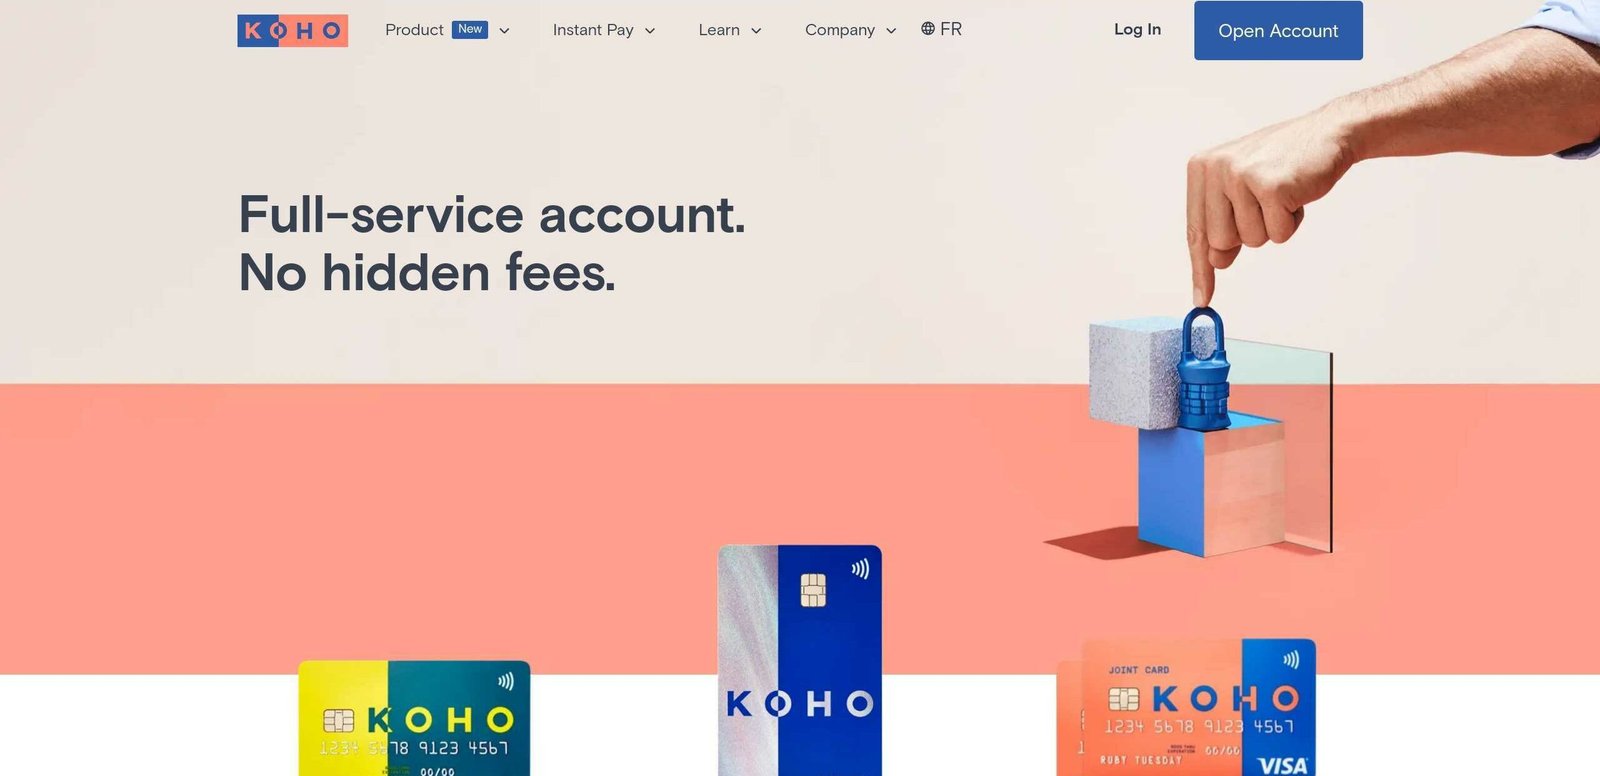 Simple "Open Account" CTA used by Koho